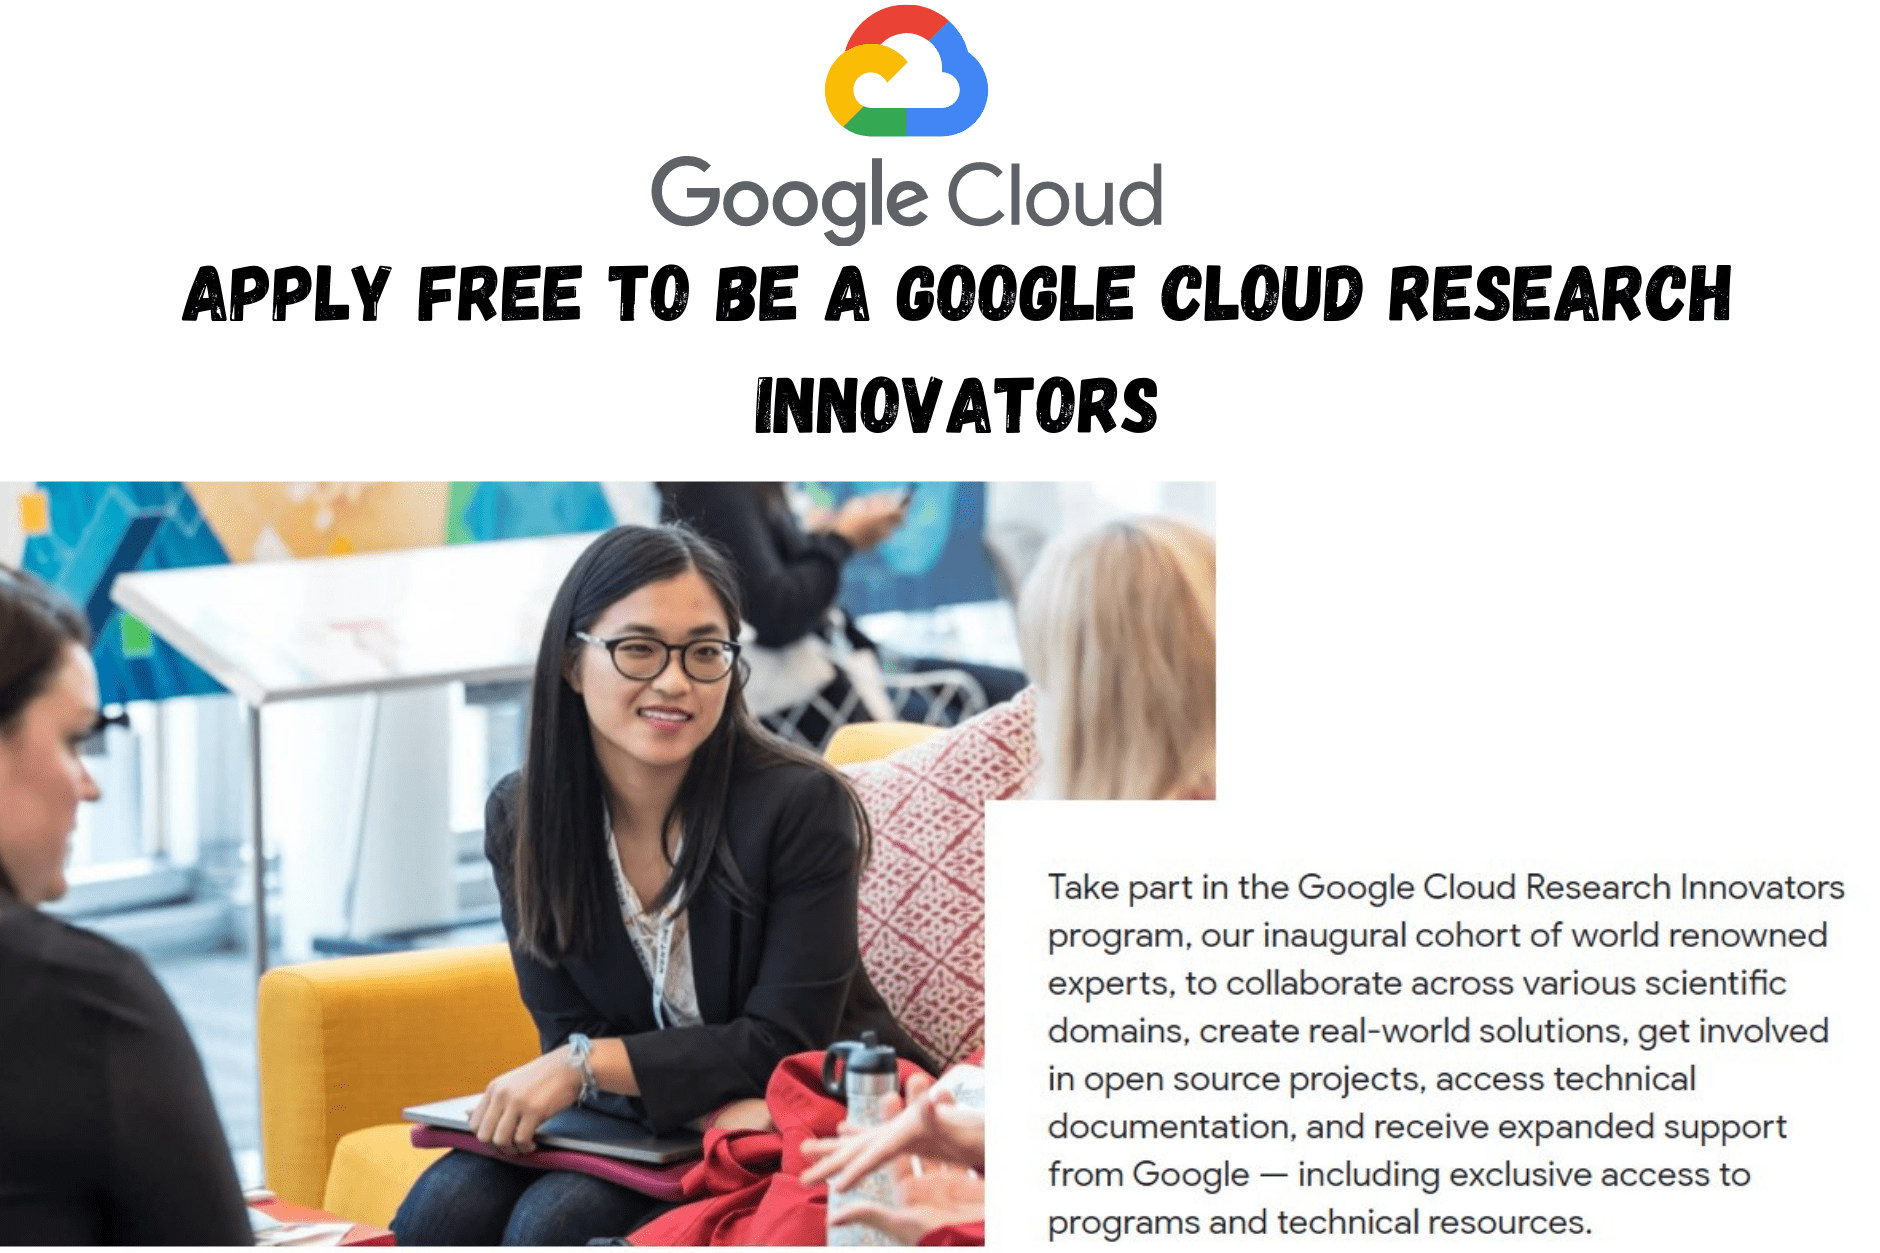 Apply free to be a Google Cloud Research Innovators